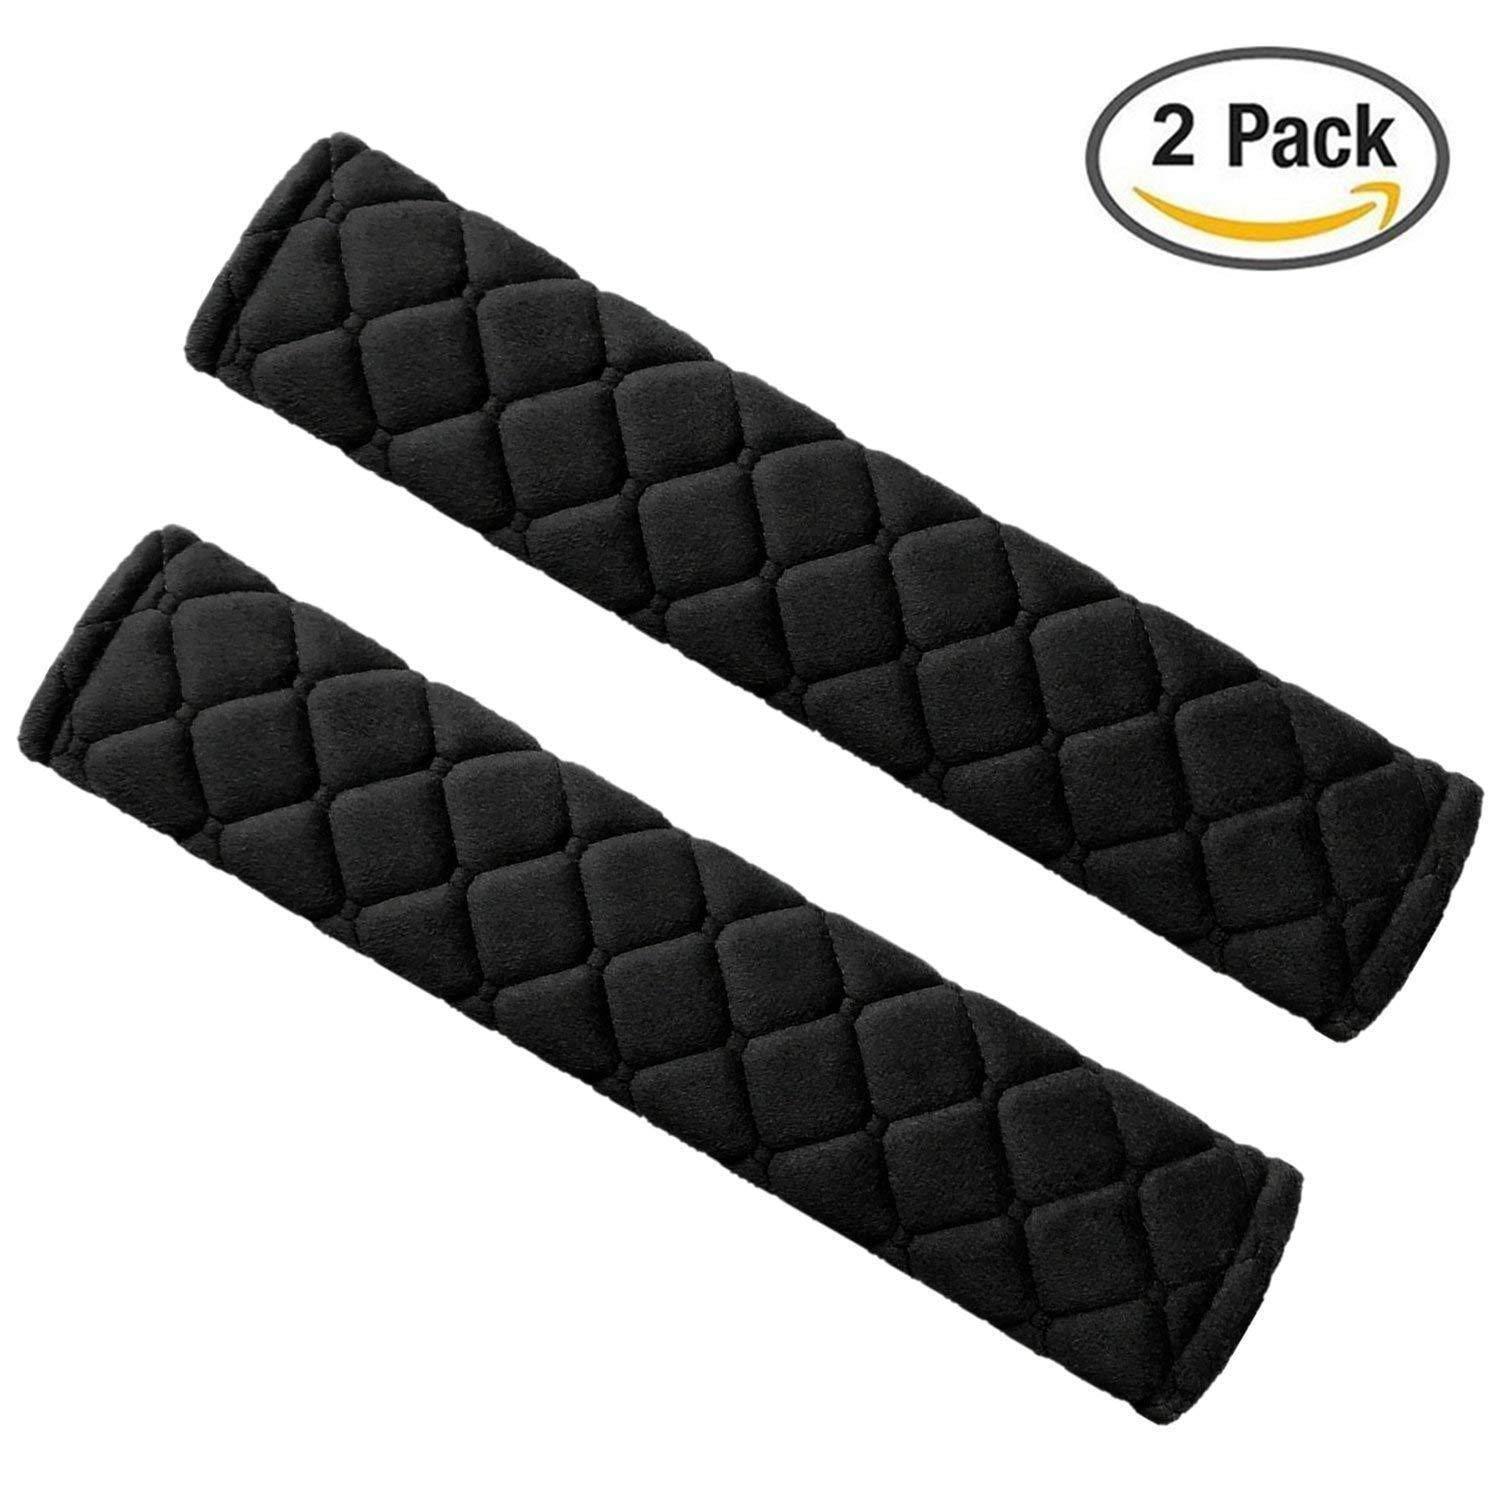 Labbyway Seat Belt Shoulder Pad Pink Universal Car Soft Seat Belt Pads Cover for All Car Owners for a More Comfortable Driving